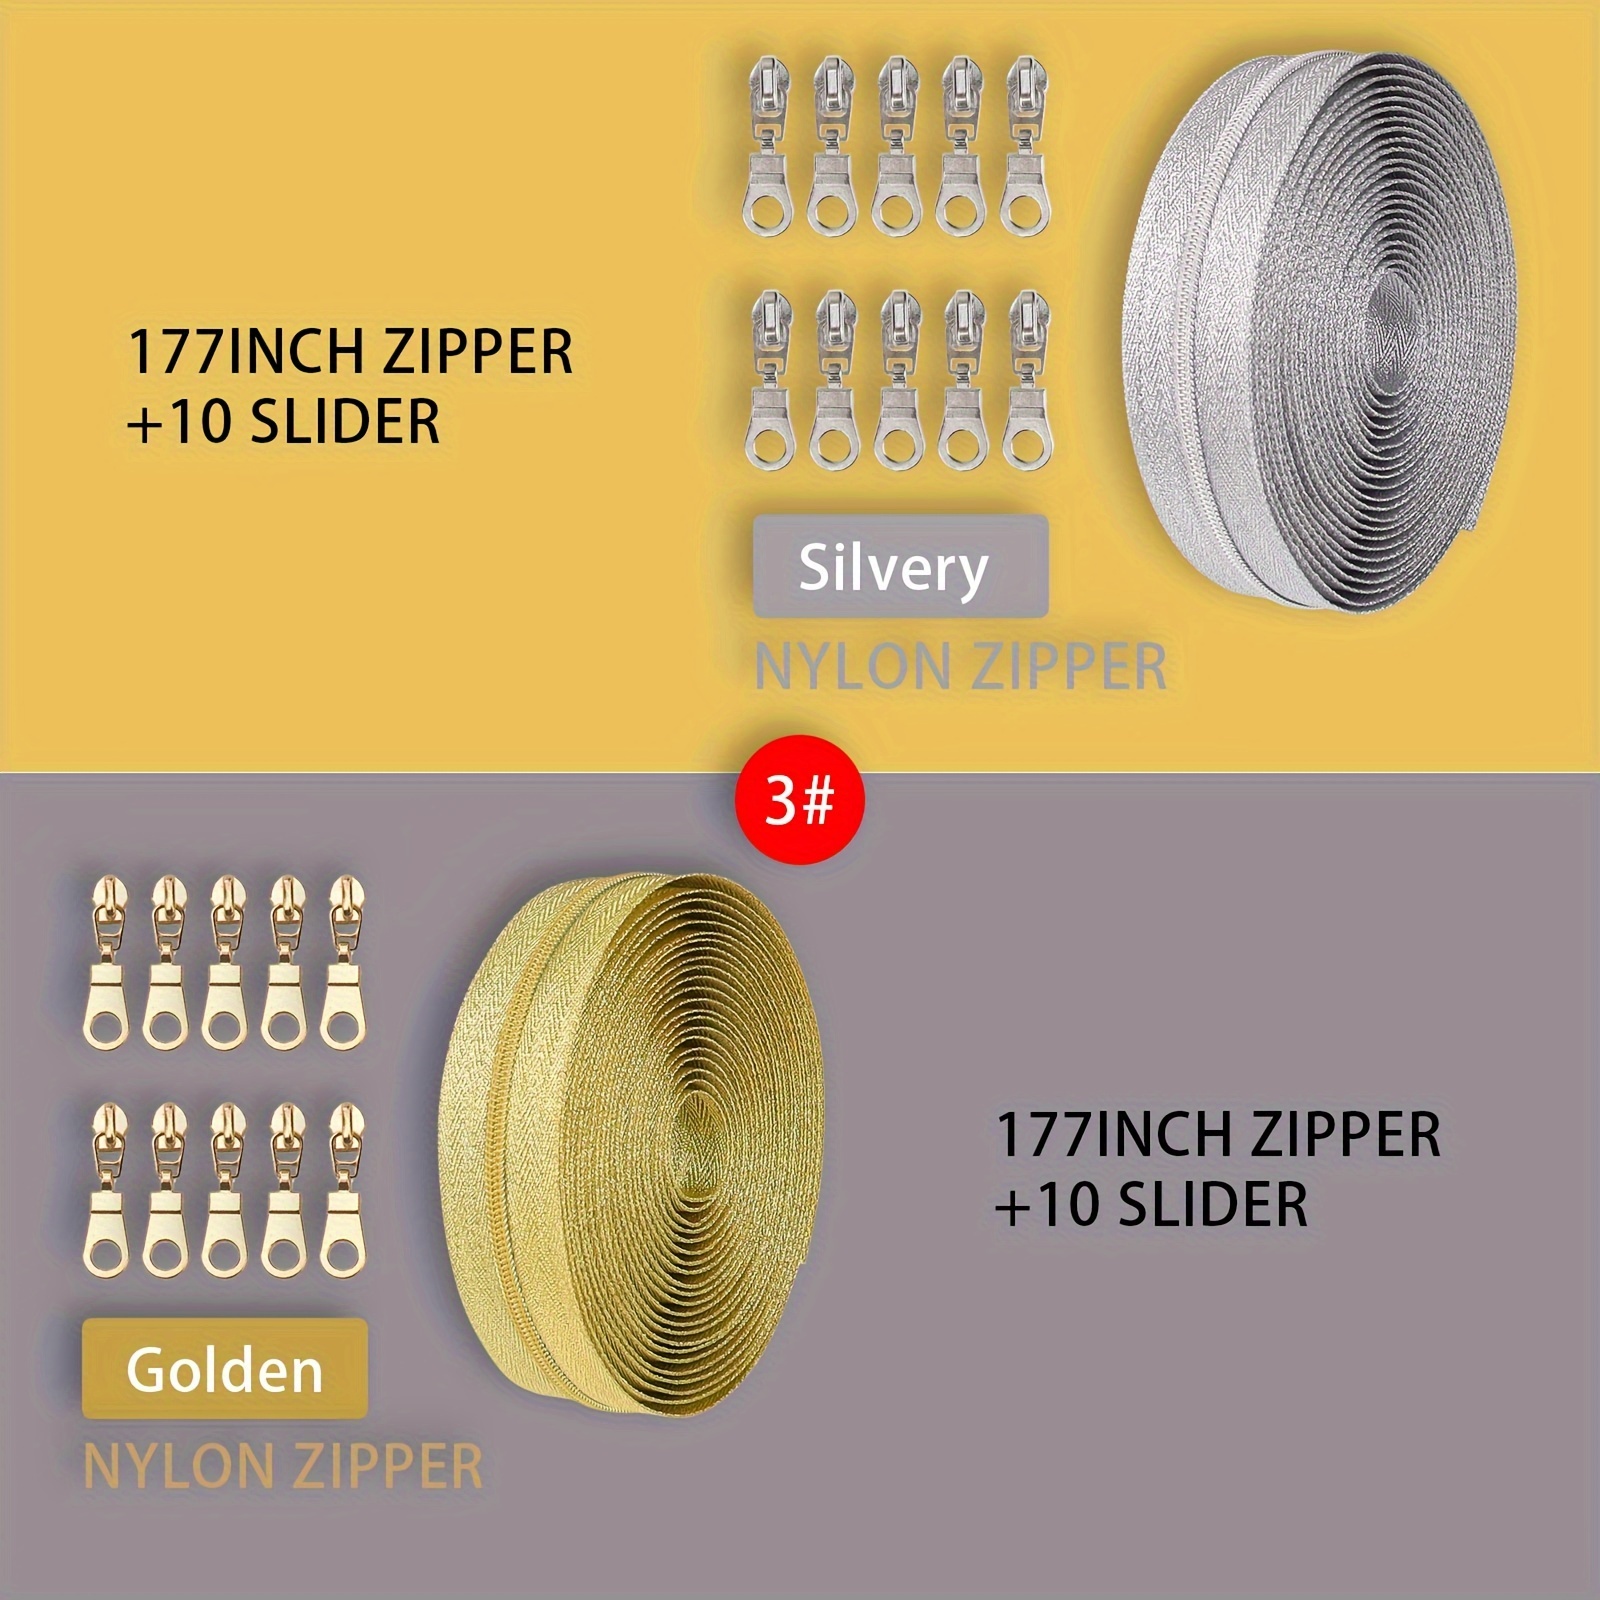 

Set Of 4.5m/177in Nylon Zipper With 10 Sliders - 3# Size For Clothing And Bags - Available In Golden And Silver Grey Colors